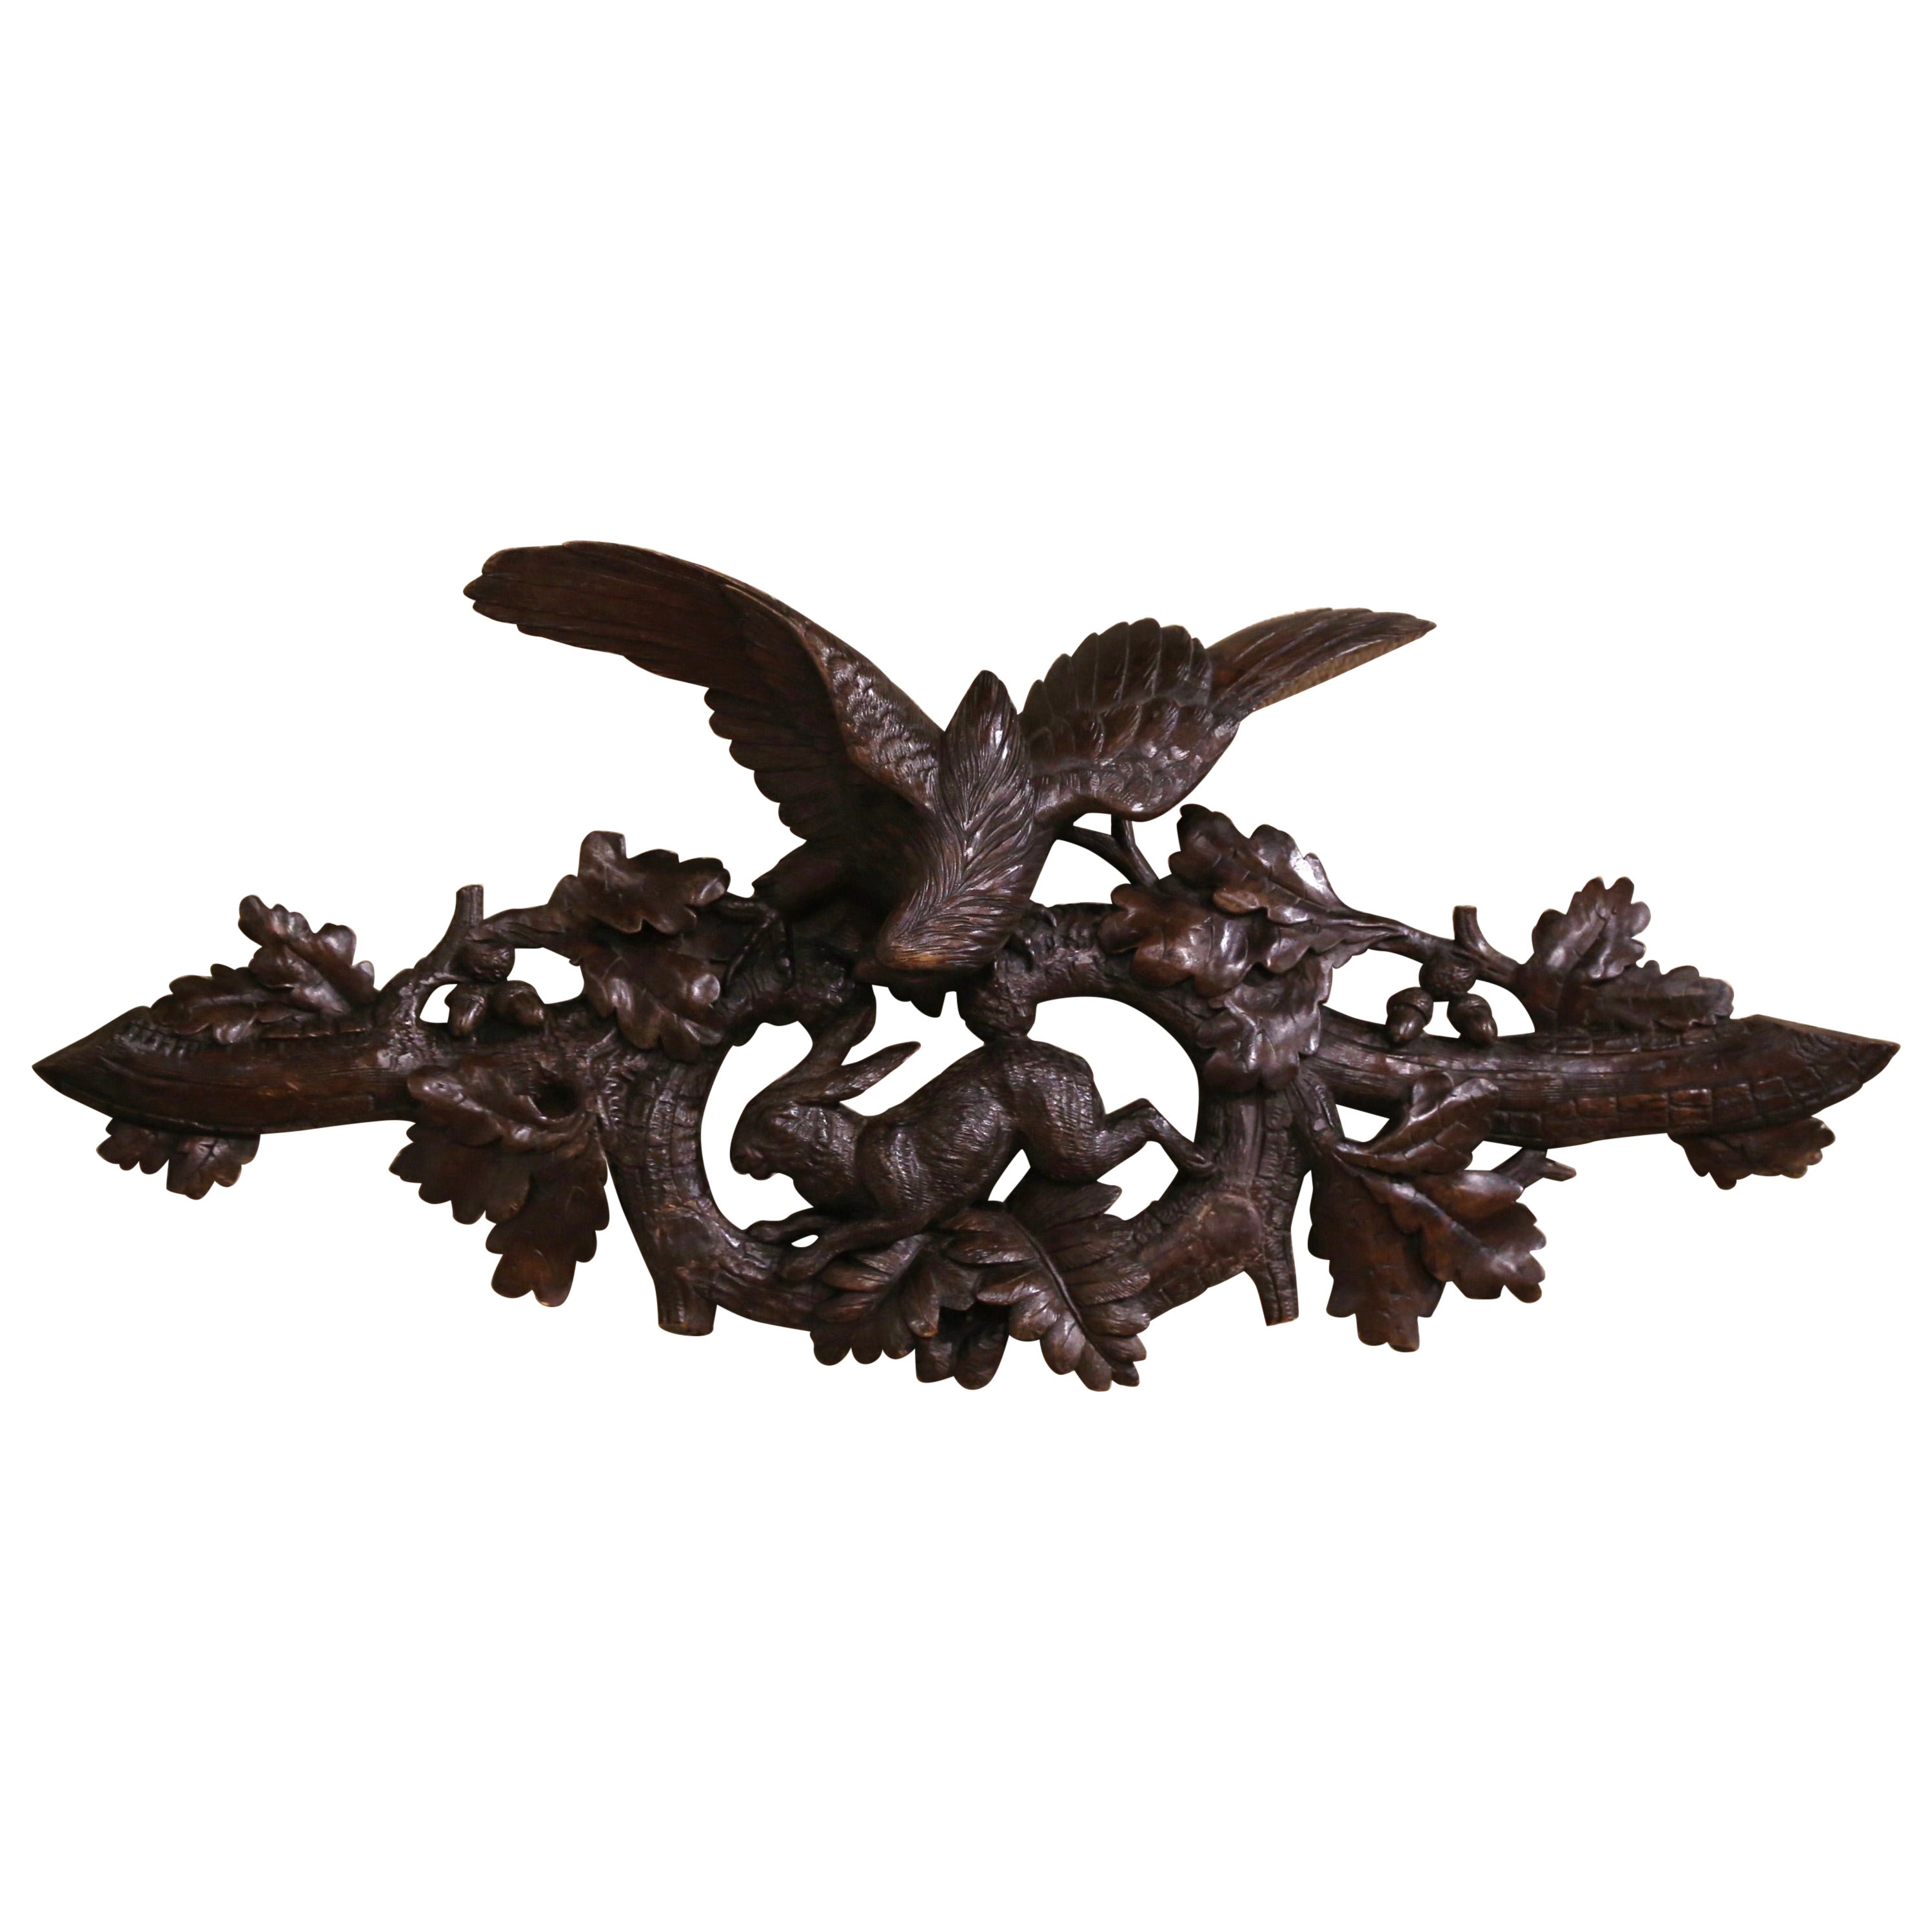 19th Century French Black Forest Carved Walnut Wall Decor with Eagle & Rabbit